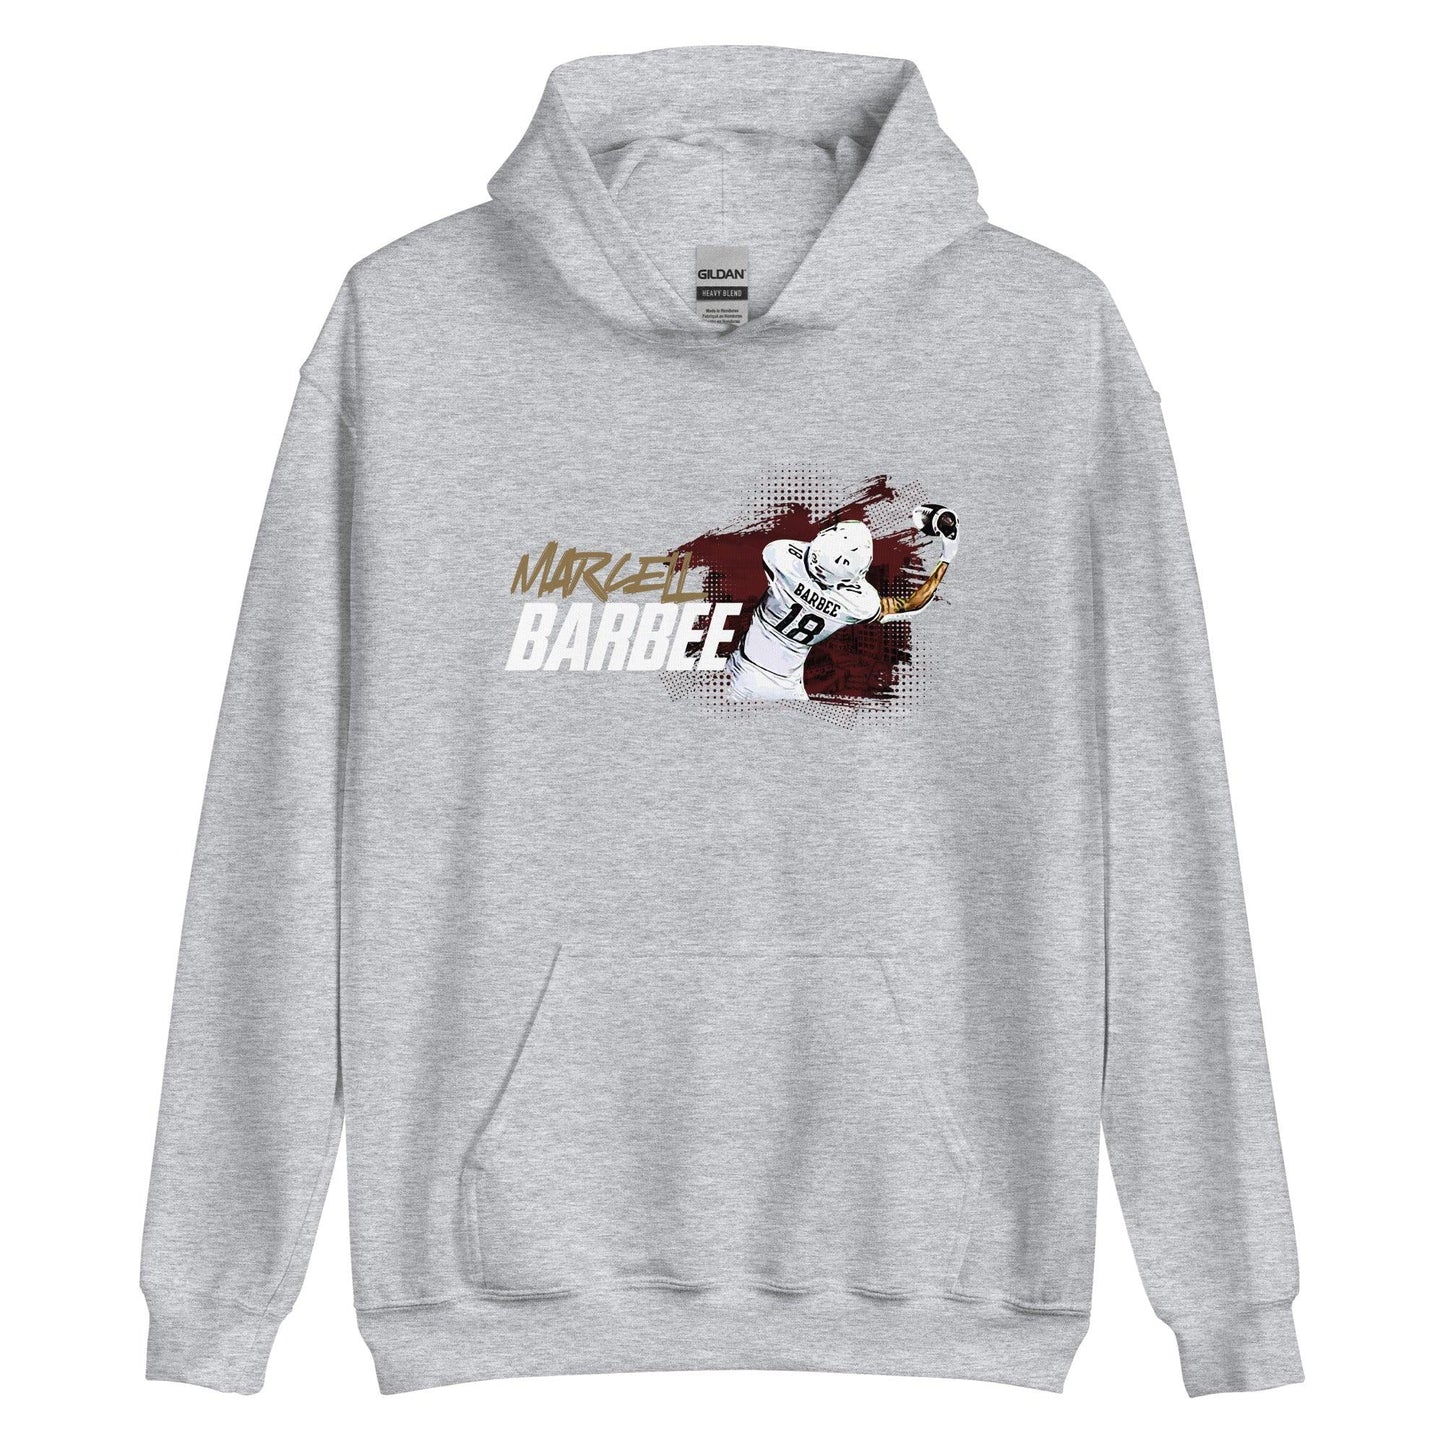 Marcell Barbee "Gameday" Hoodie - Fan Arch